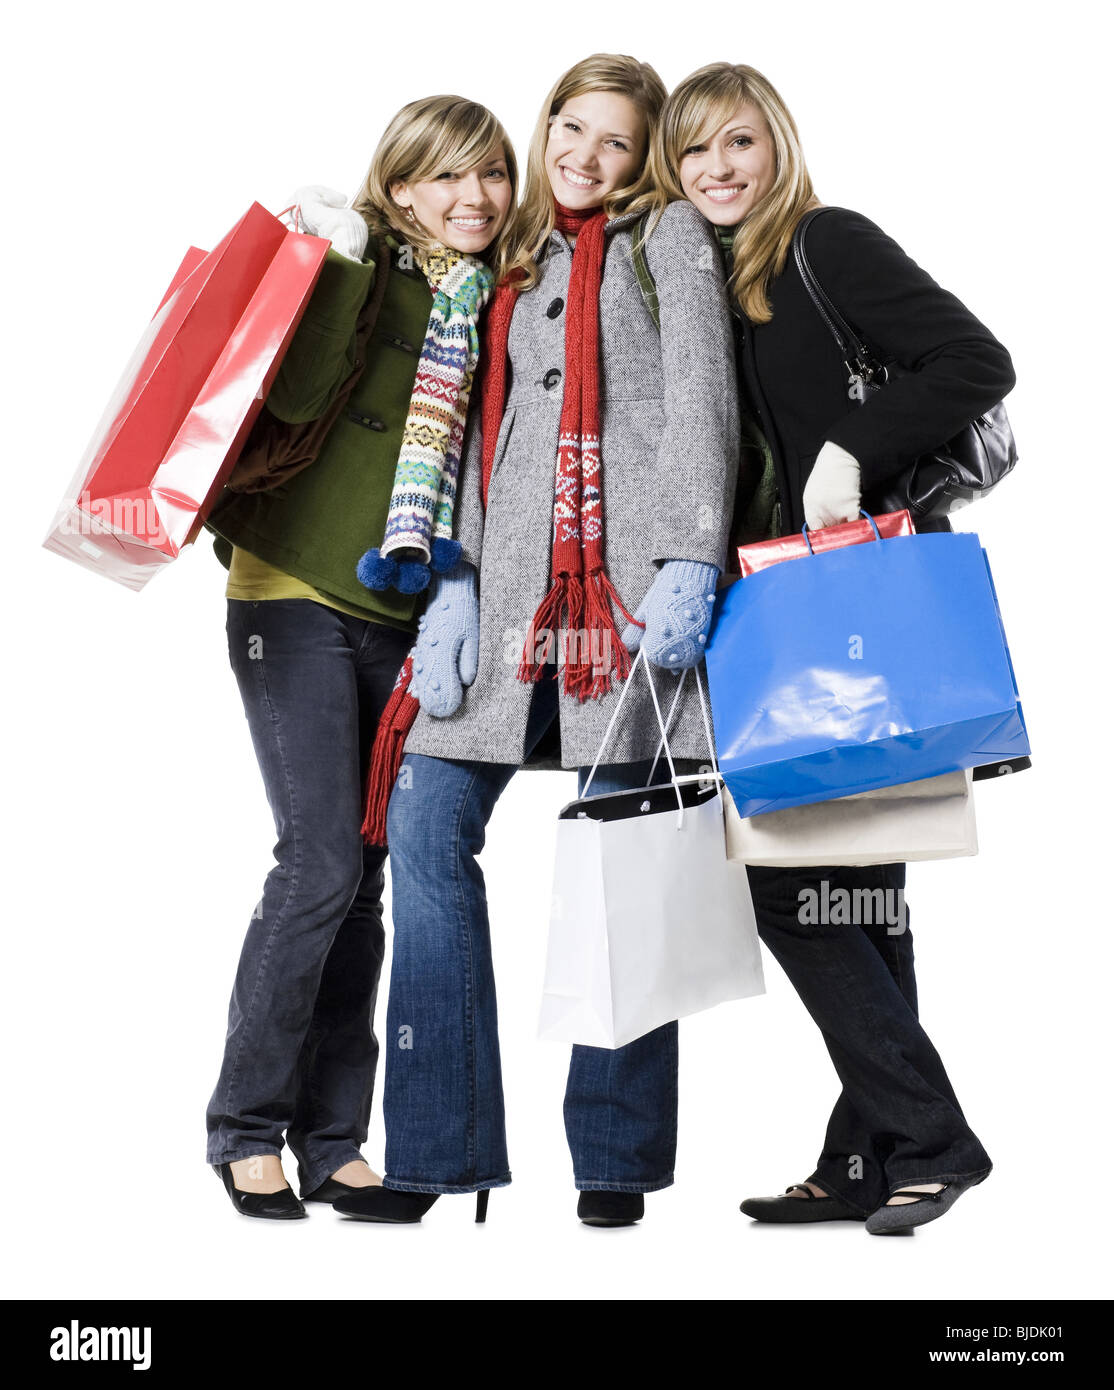 girls with shopping bags Stock Photo